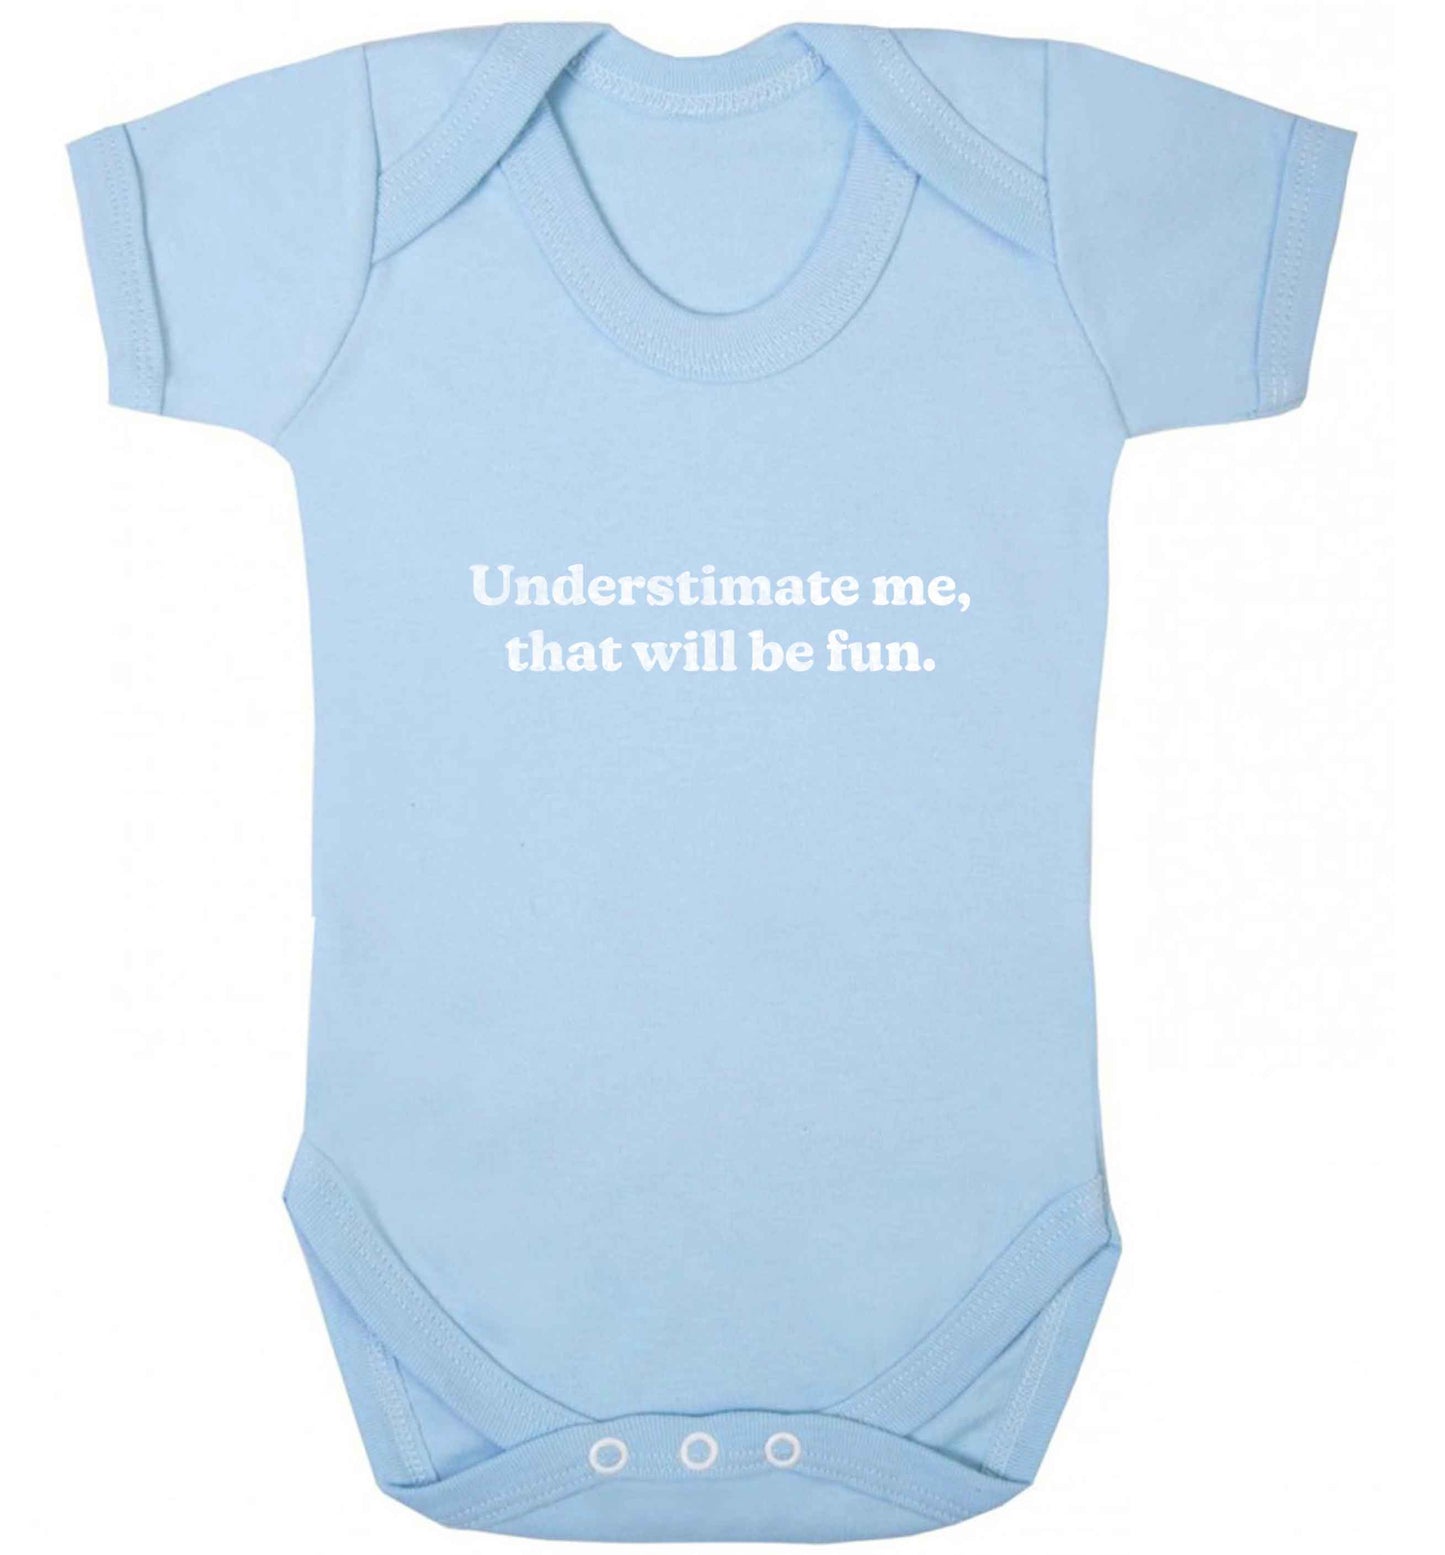 Underestimate me that will be fun baby vest pale blue 18-24 months